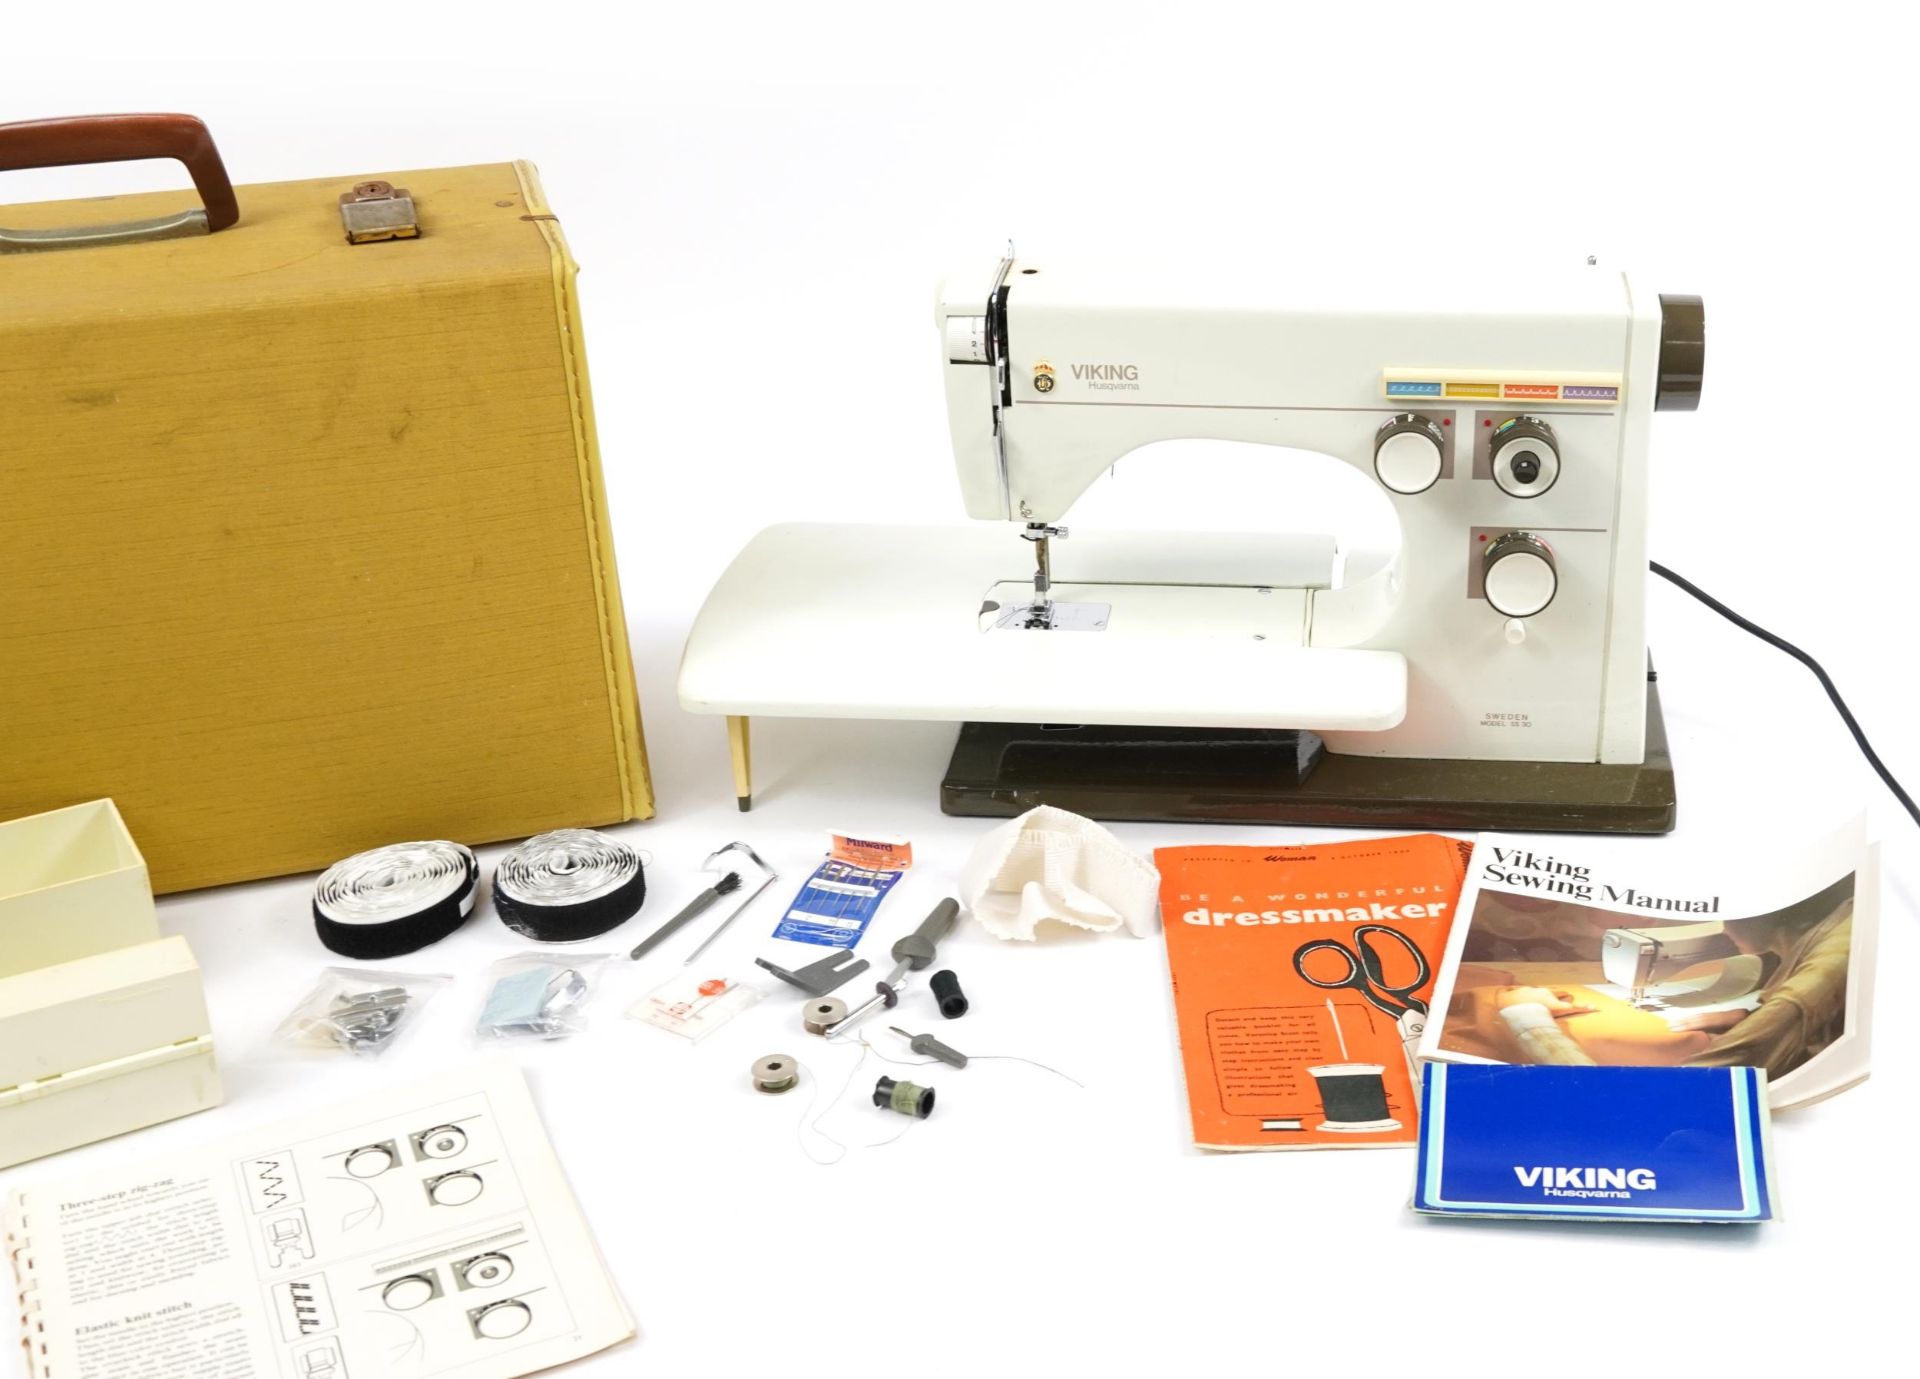 Husqvarna Viking electric sewing machine with case, model 5530 - Image 3 of 5